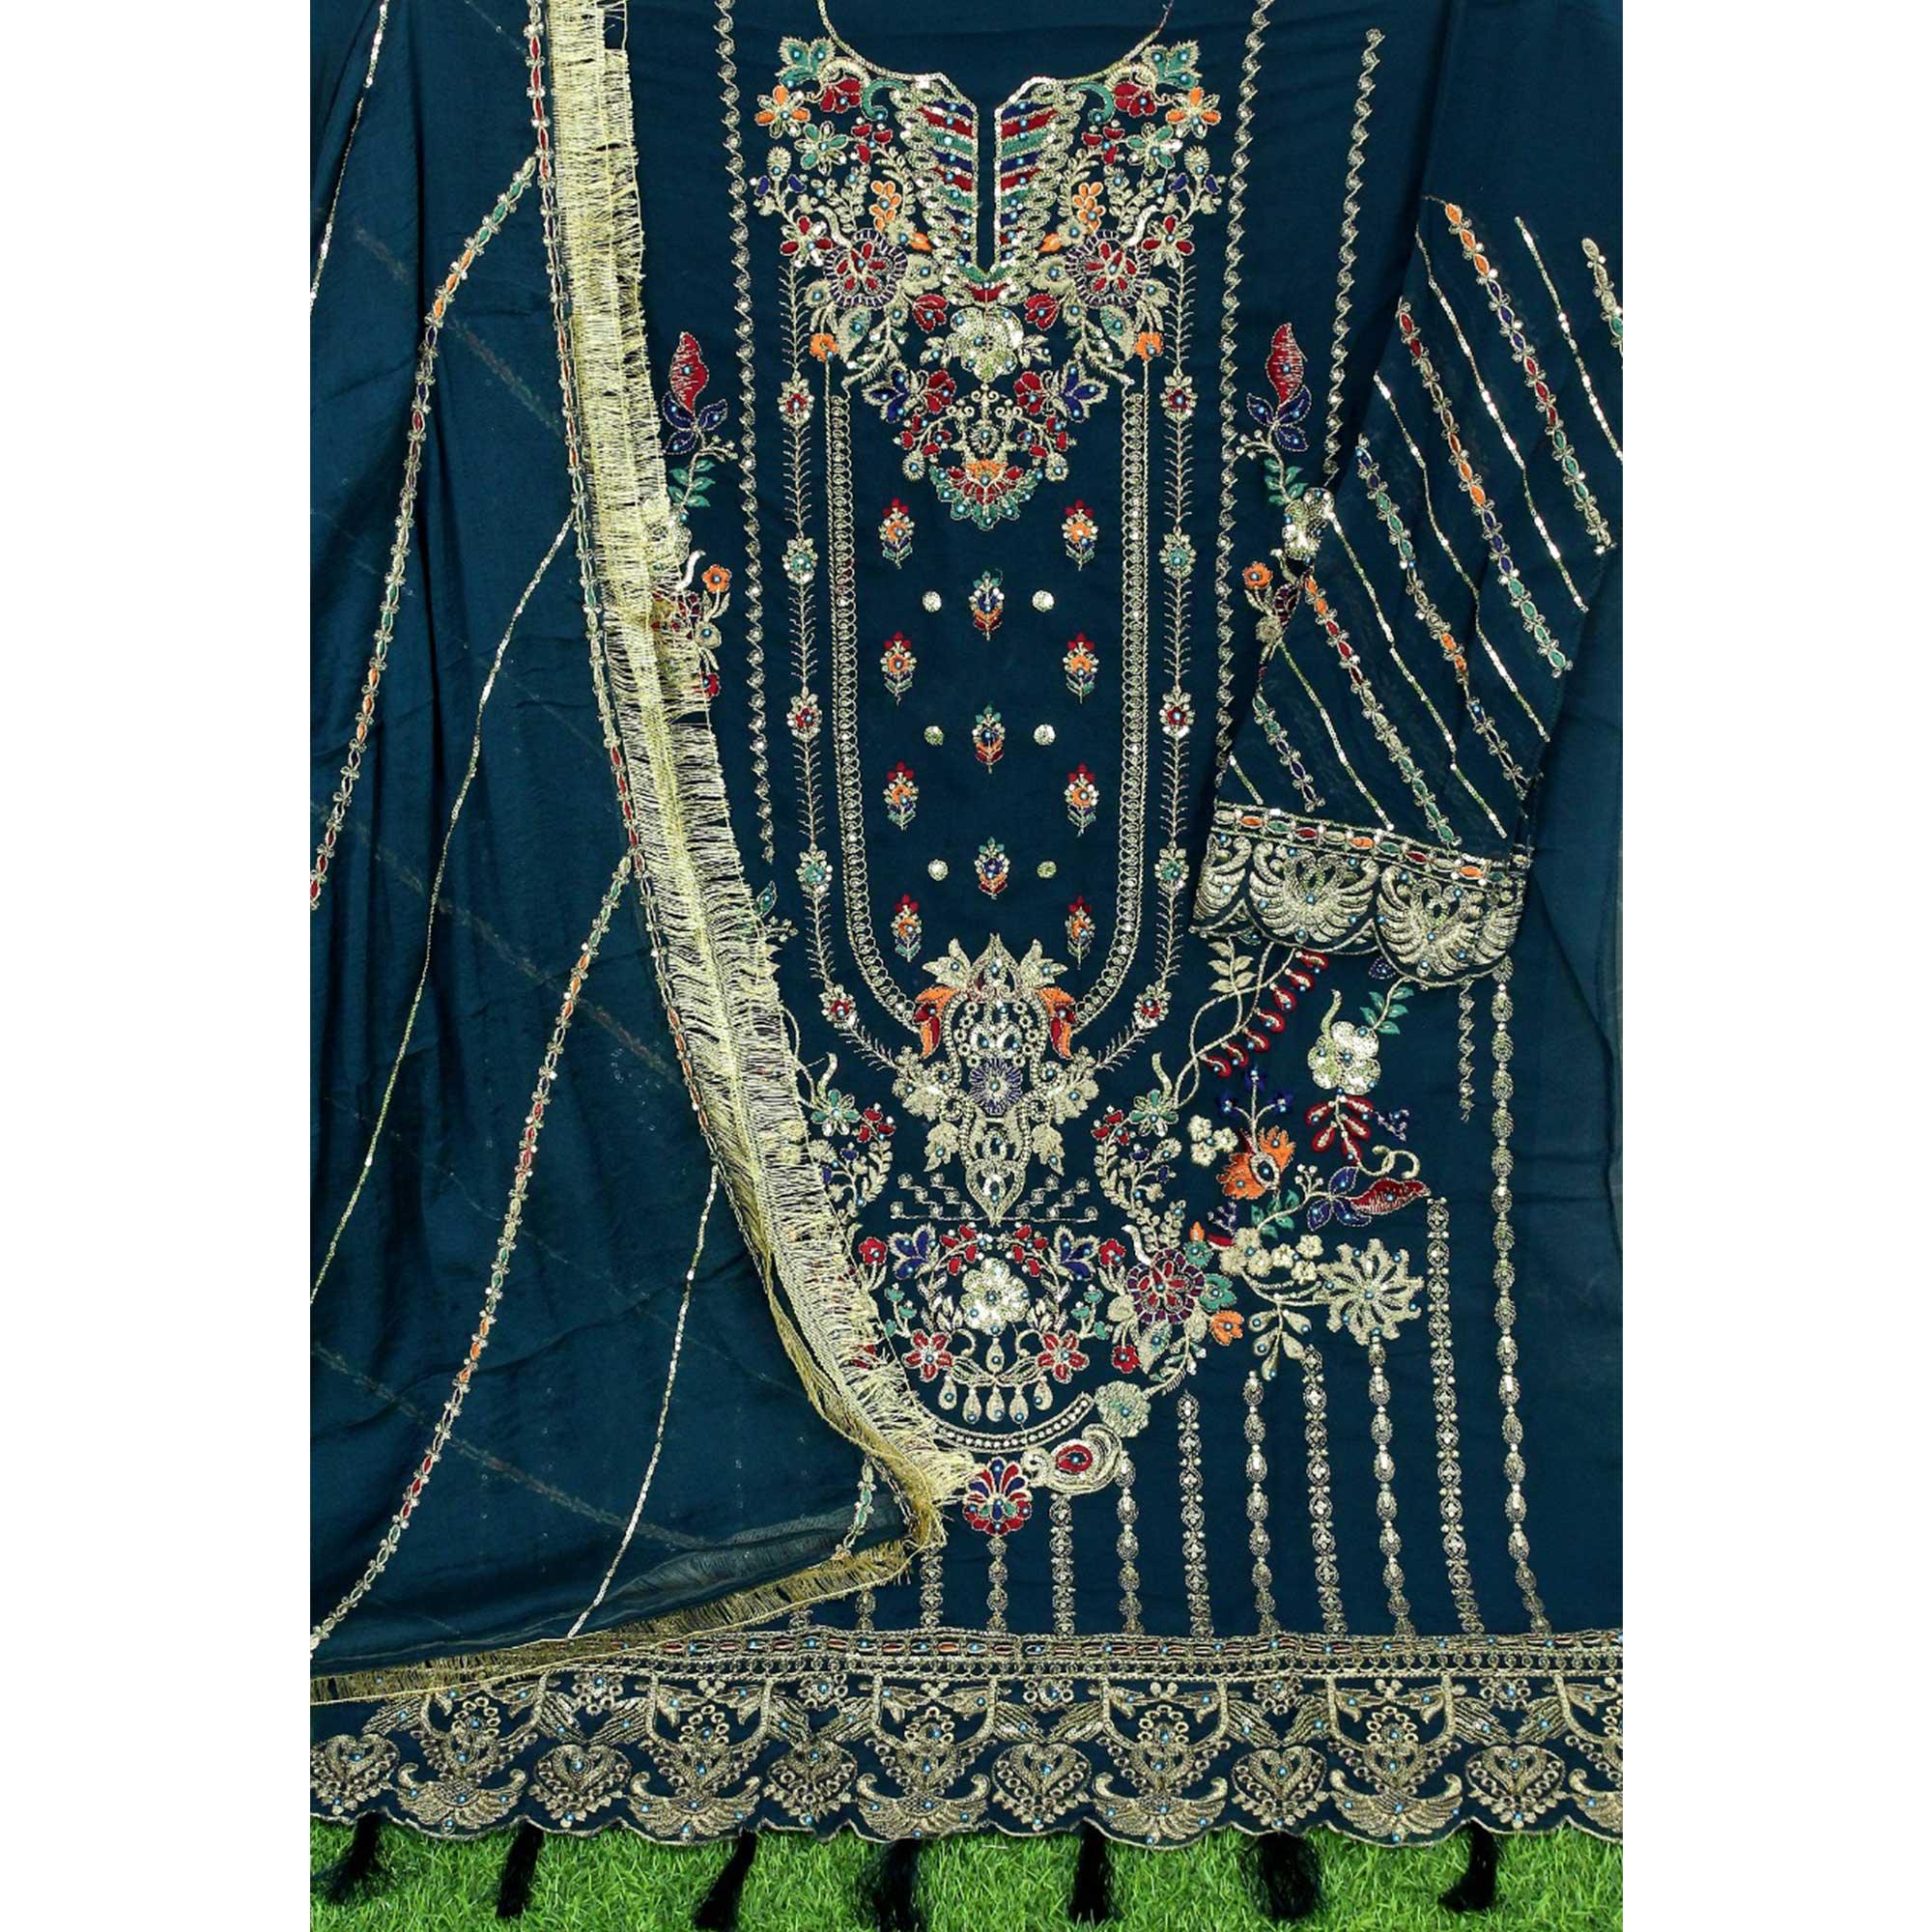 Morpich Floral Embroidered With Sequence Georgette Pakistani Suit - Peachmode